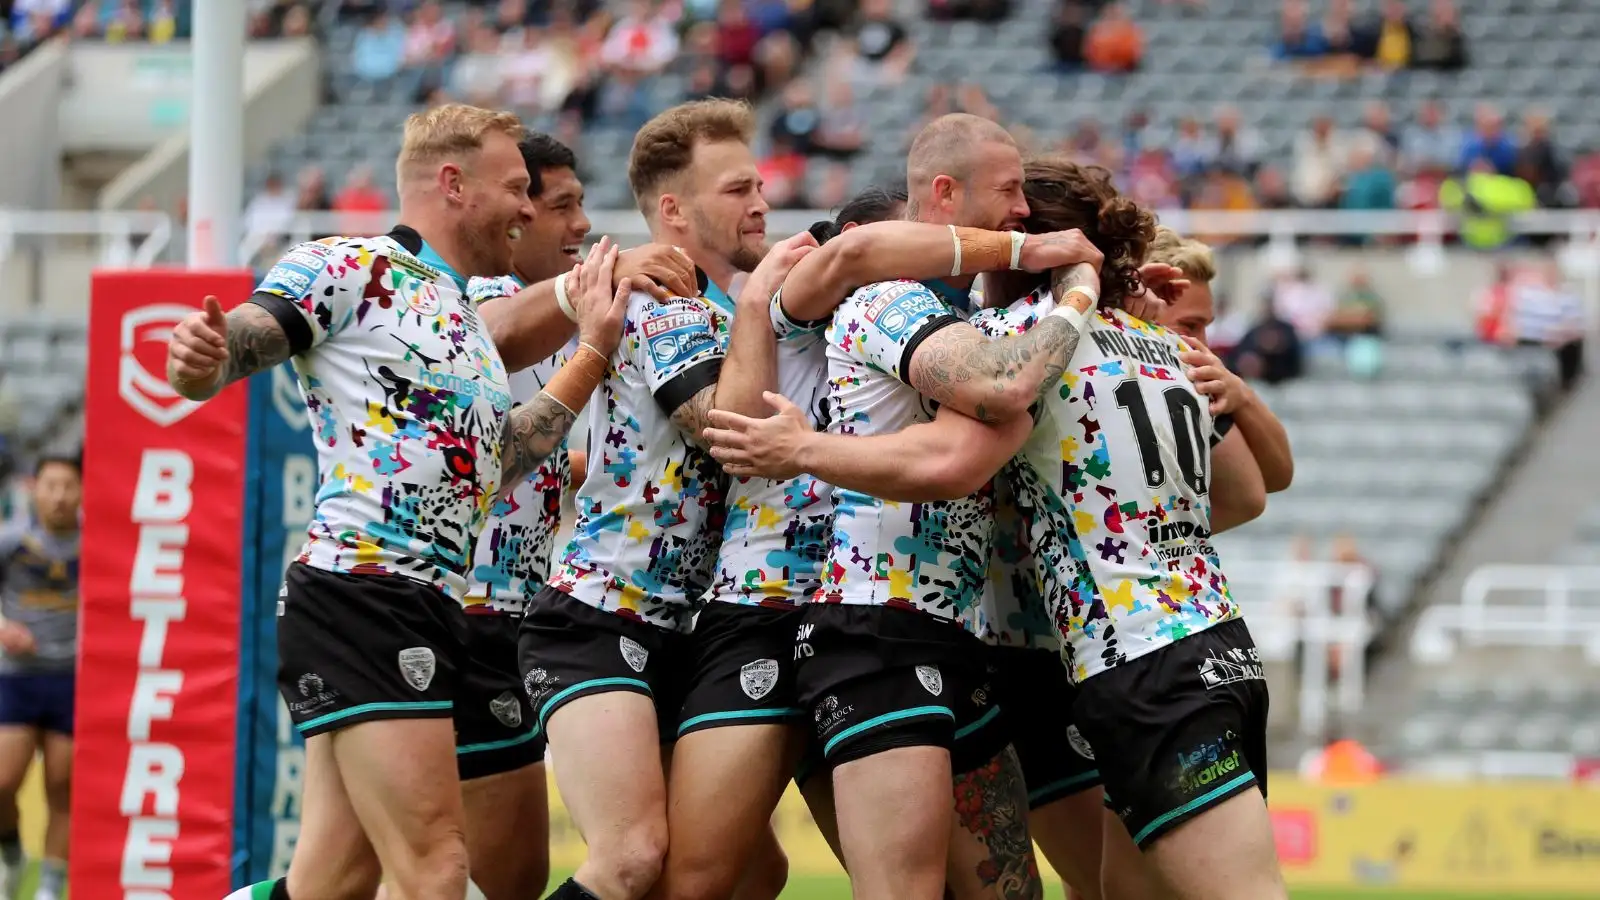 Robbie Mulhern celebrates with his team-mates after scoring a try at Magic Weekend. Photo by Mark Fletcher | MI News.